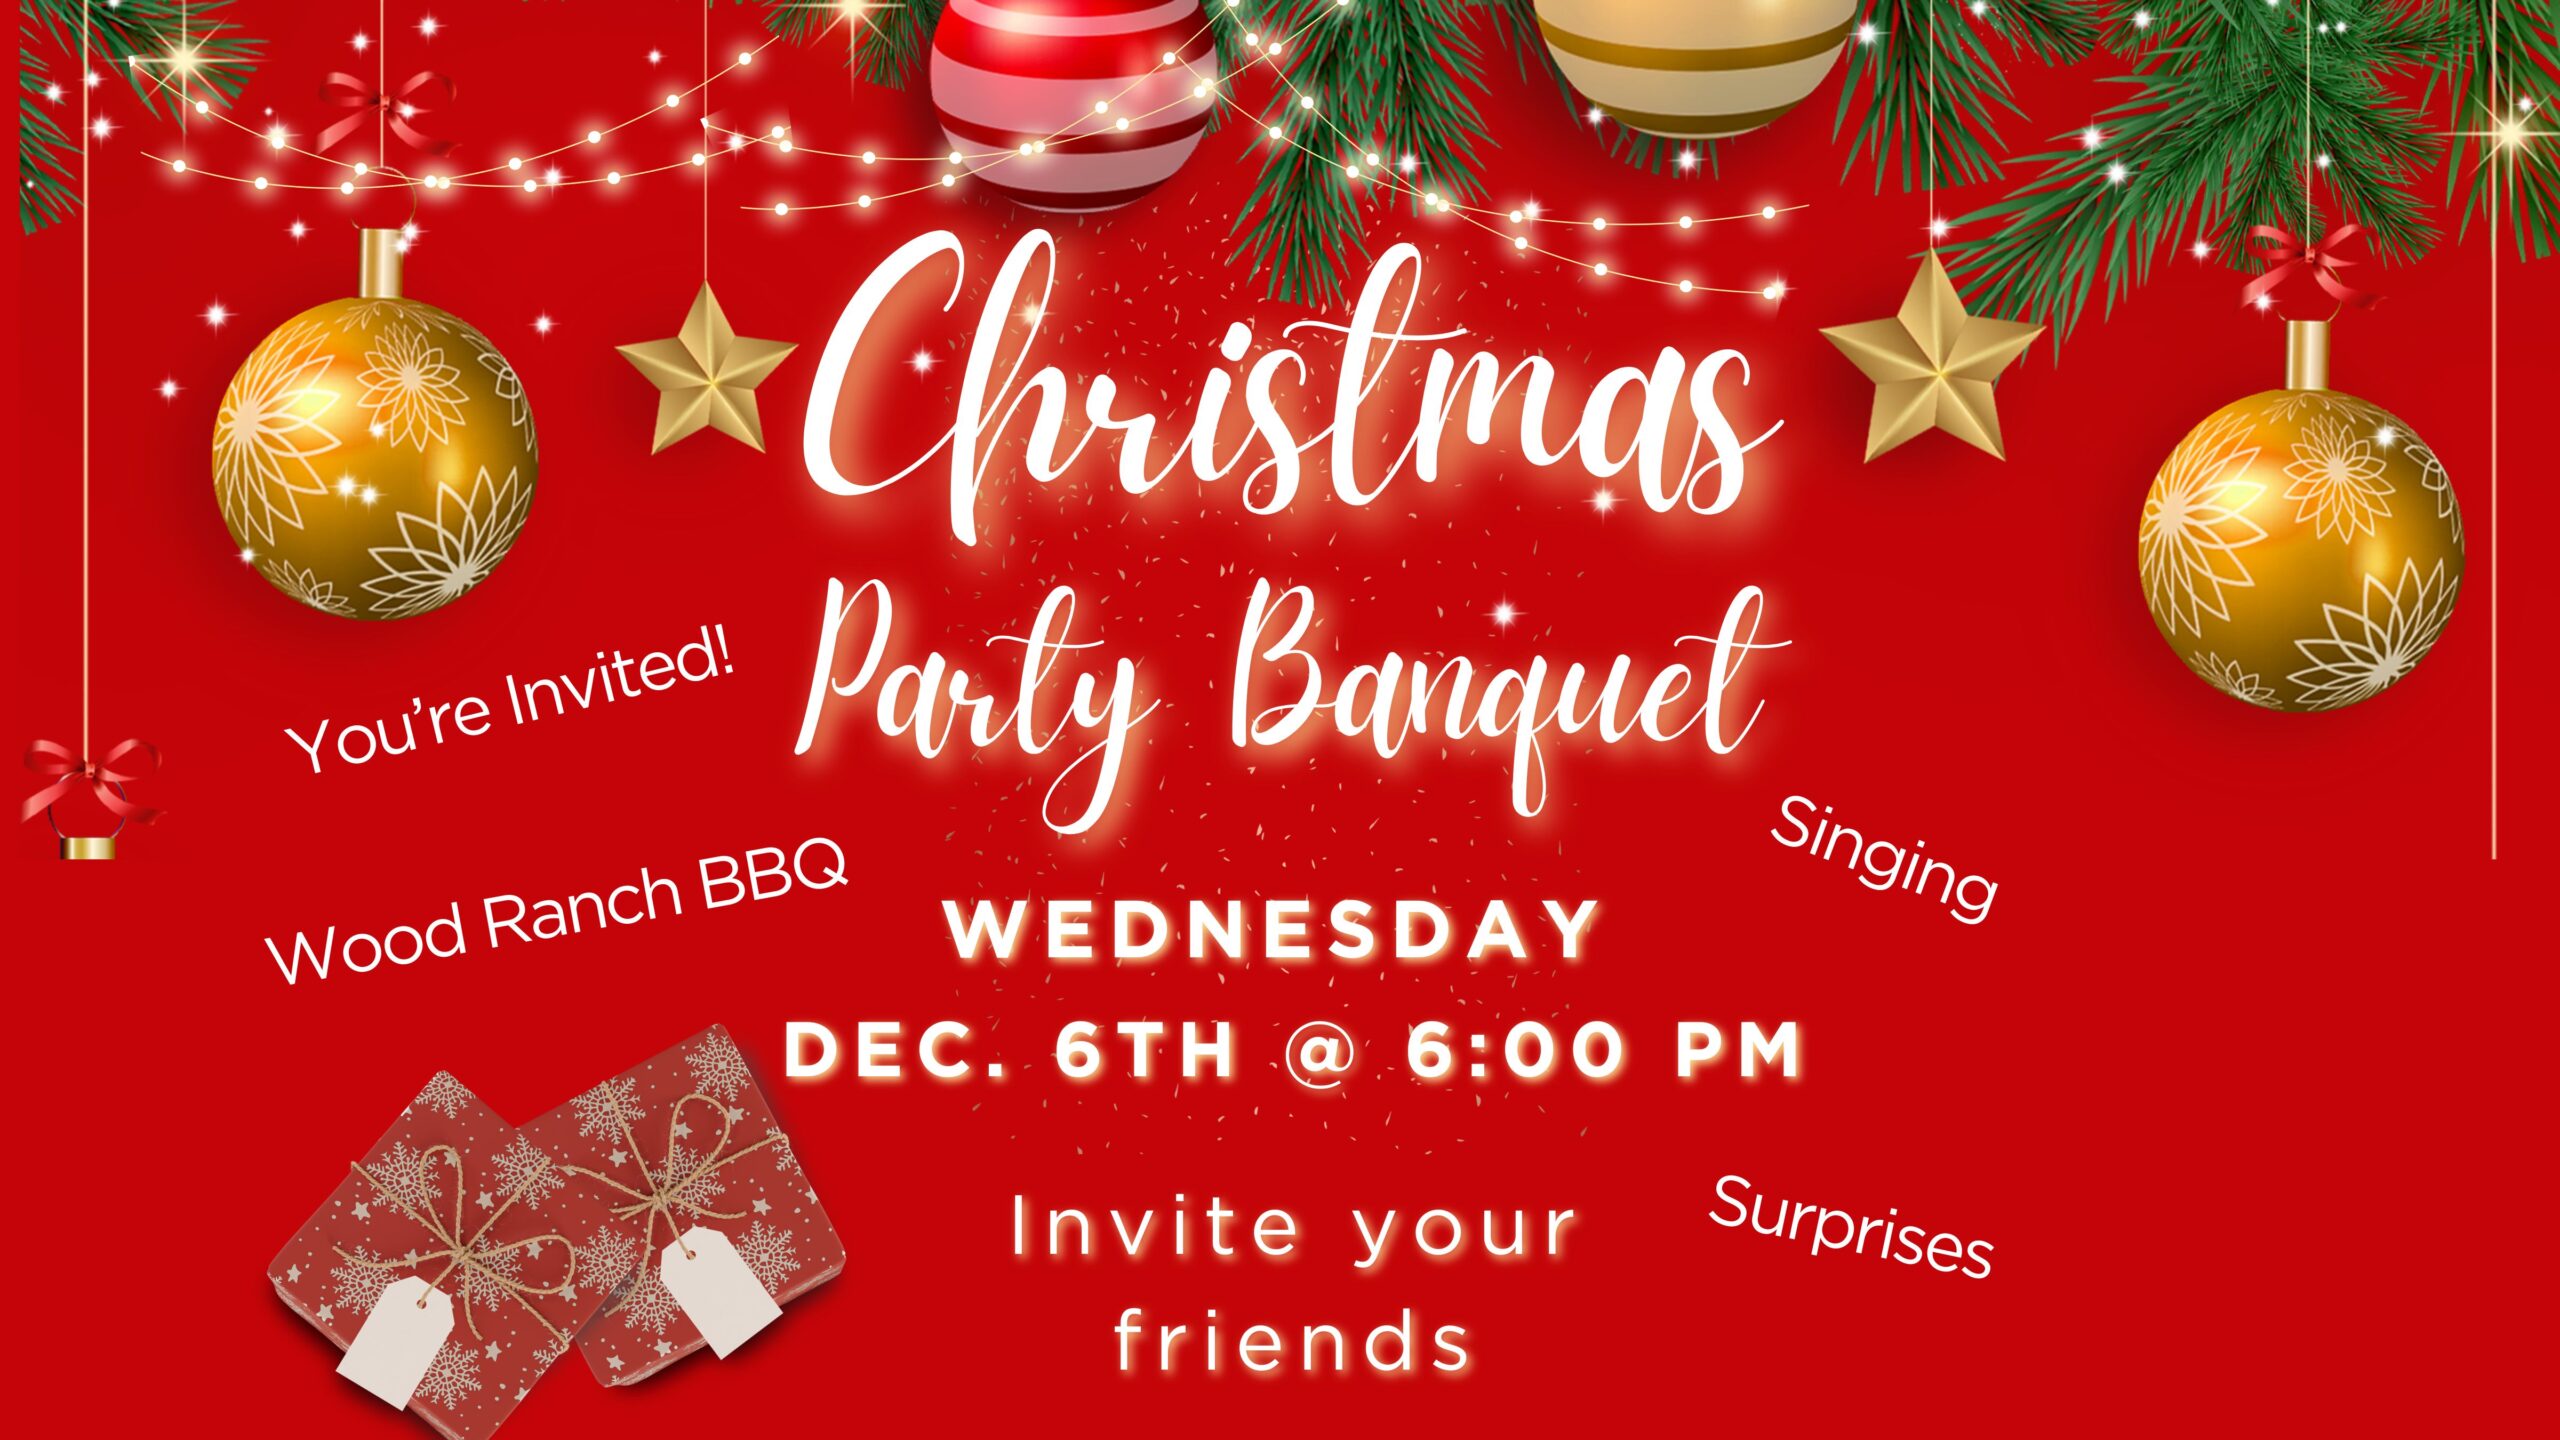 Christmas Party Banquet